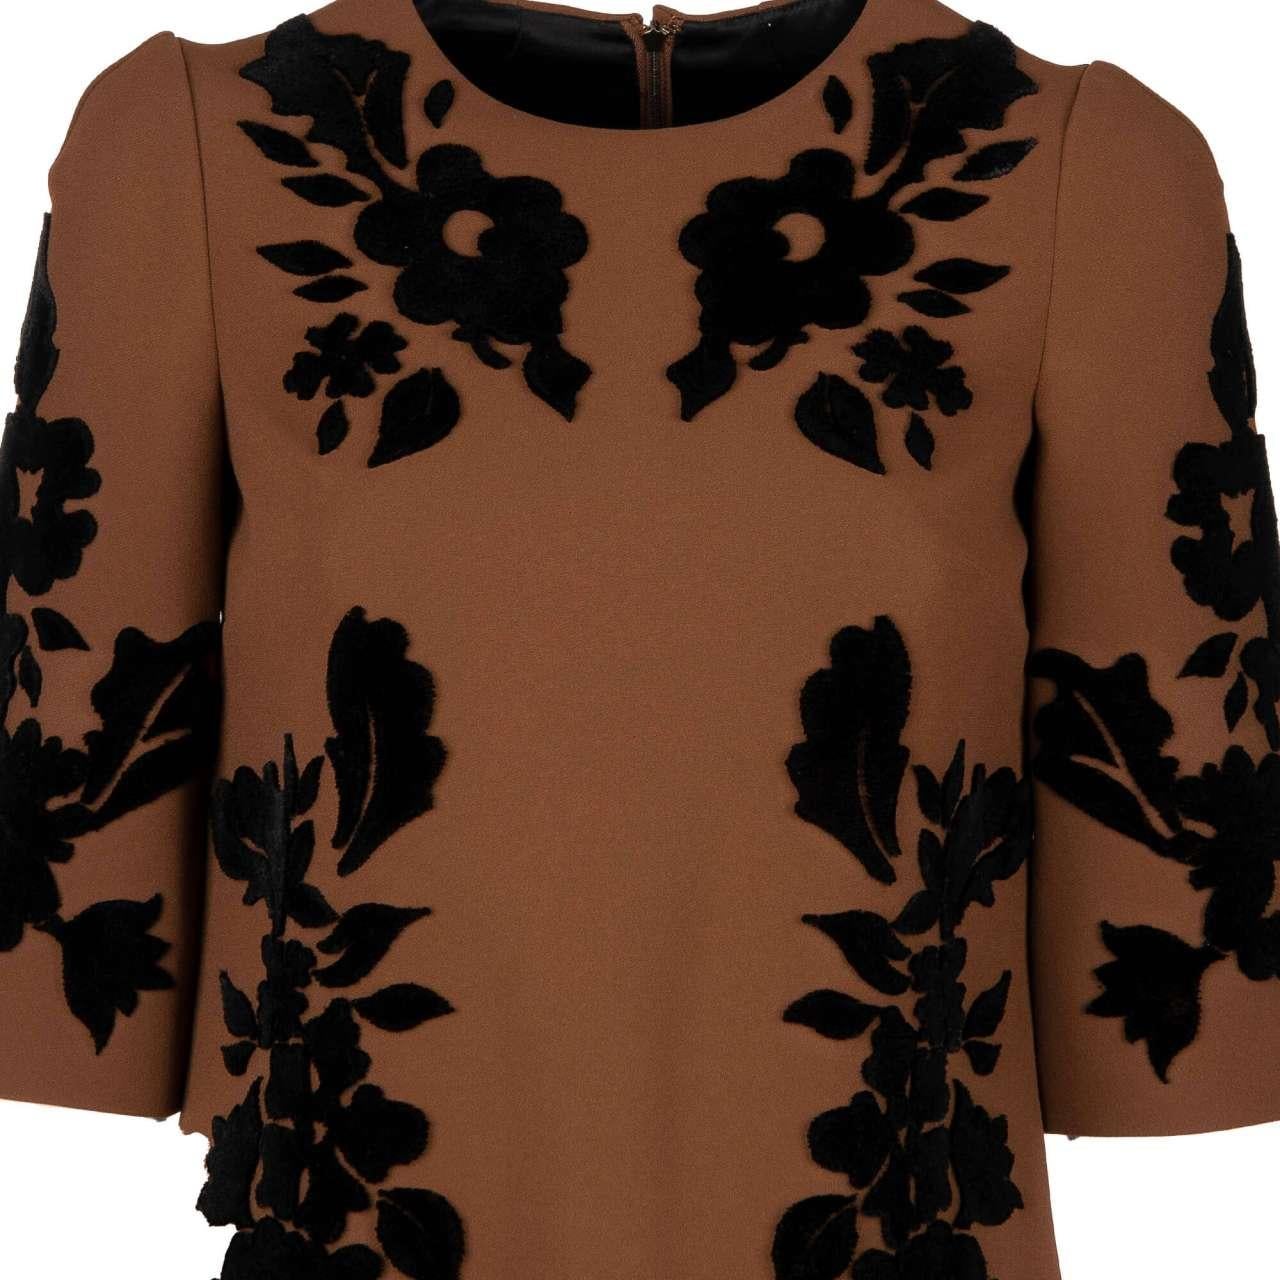 Dolce & Gabbana - Baroque Embroidery Dress Brown IT 38 In Excellent Condition For Sale In Erkrath, DE